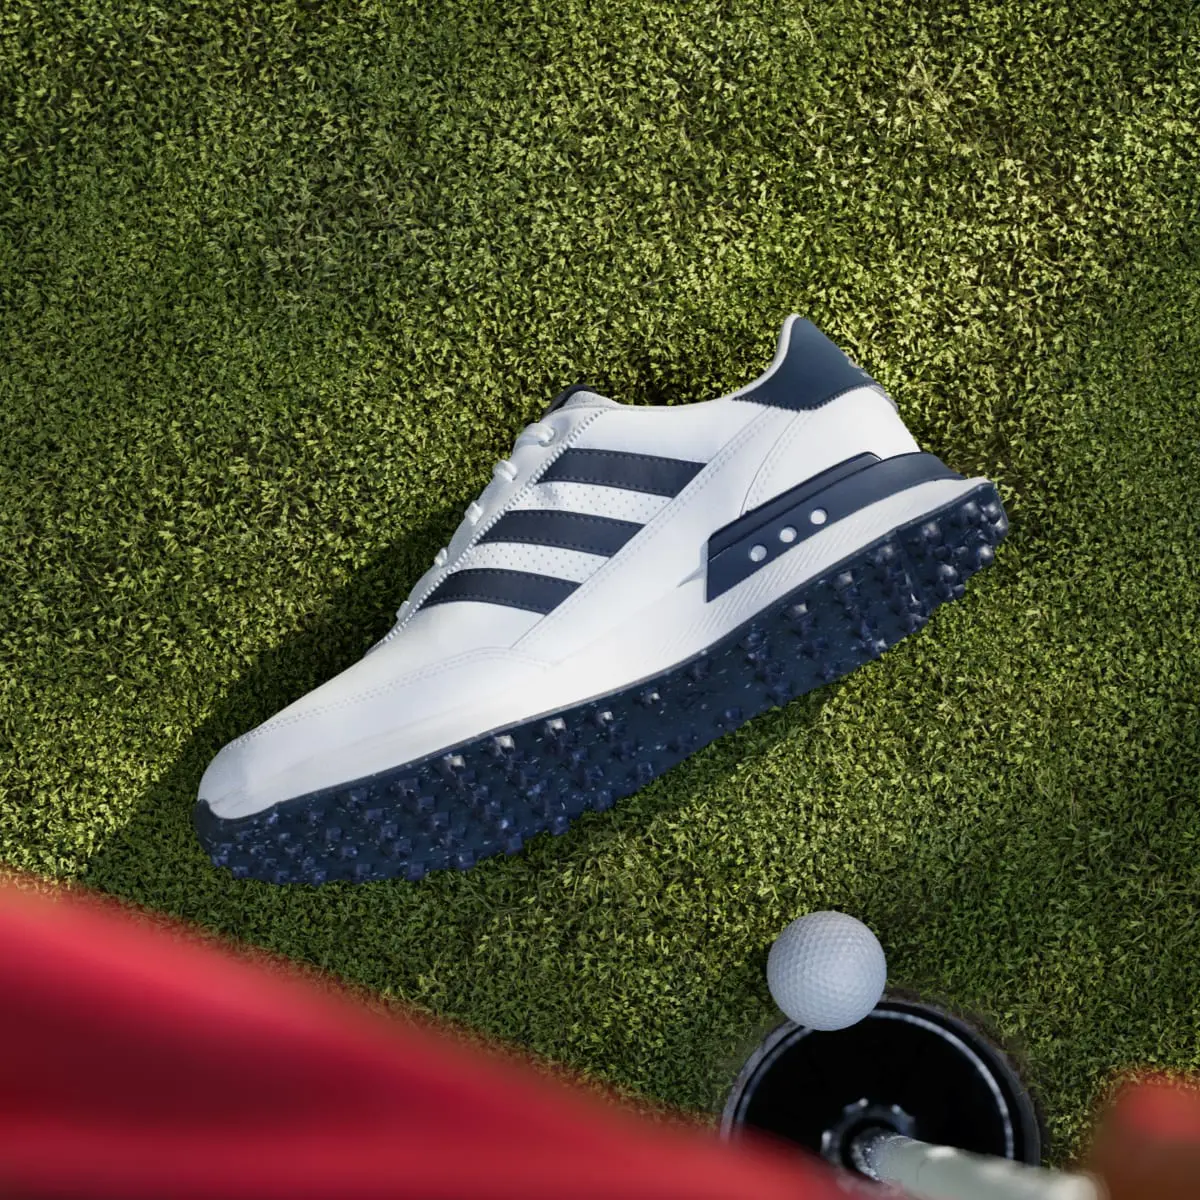 Adidas S2G Spikeless Leather 24 Golf Shoes. 2